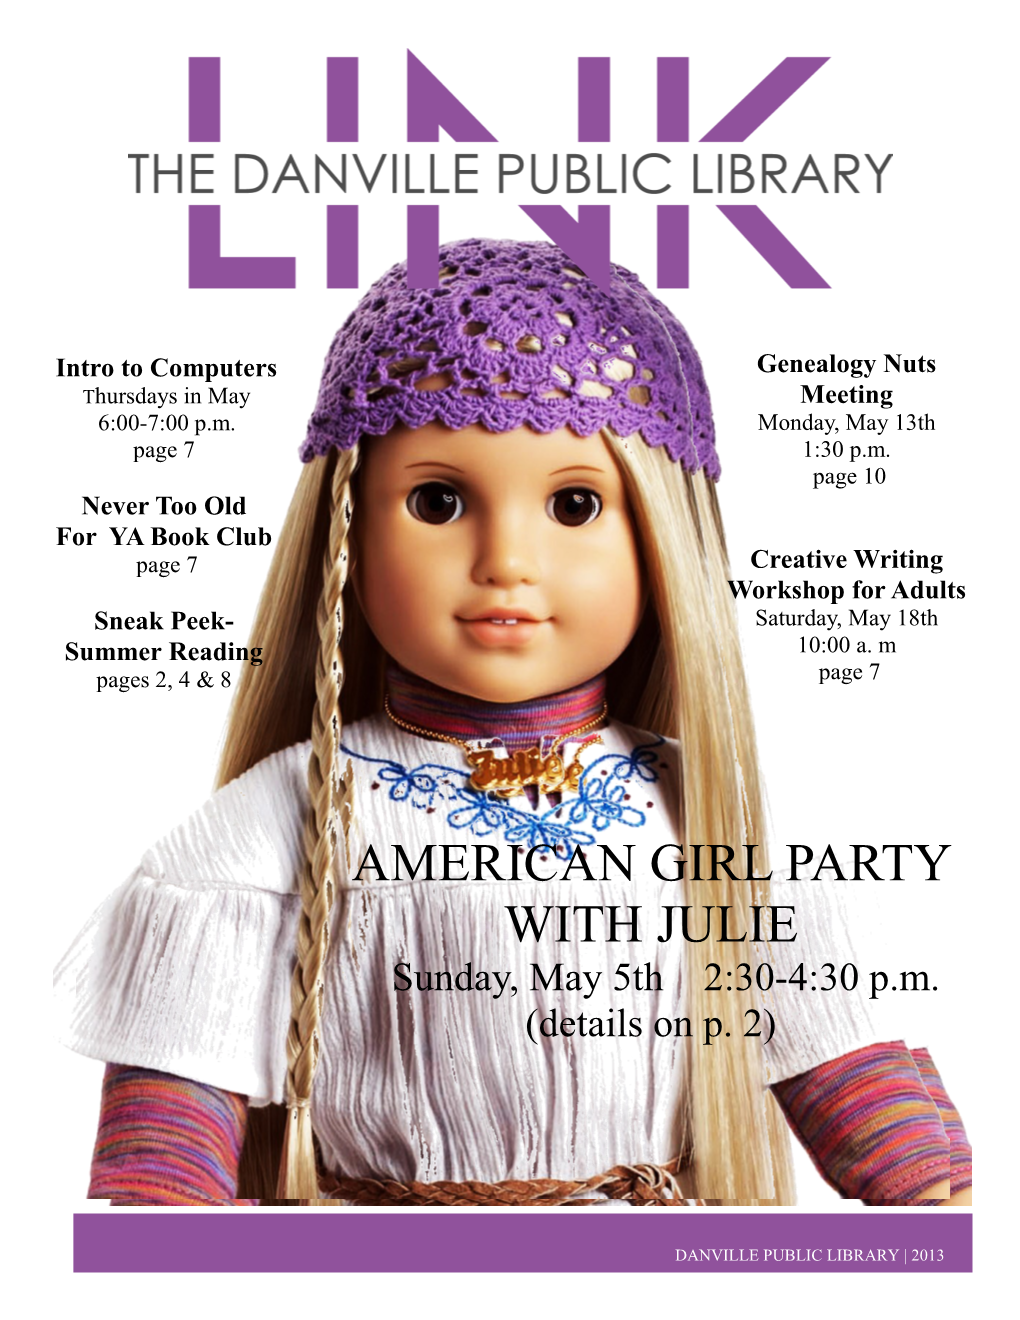 AMERICAN GIRL PARTY with JULIE Sunday, May 5Th 2:30-4:30 P.M